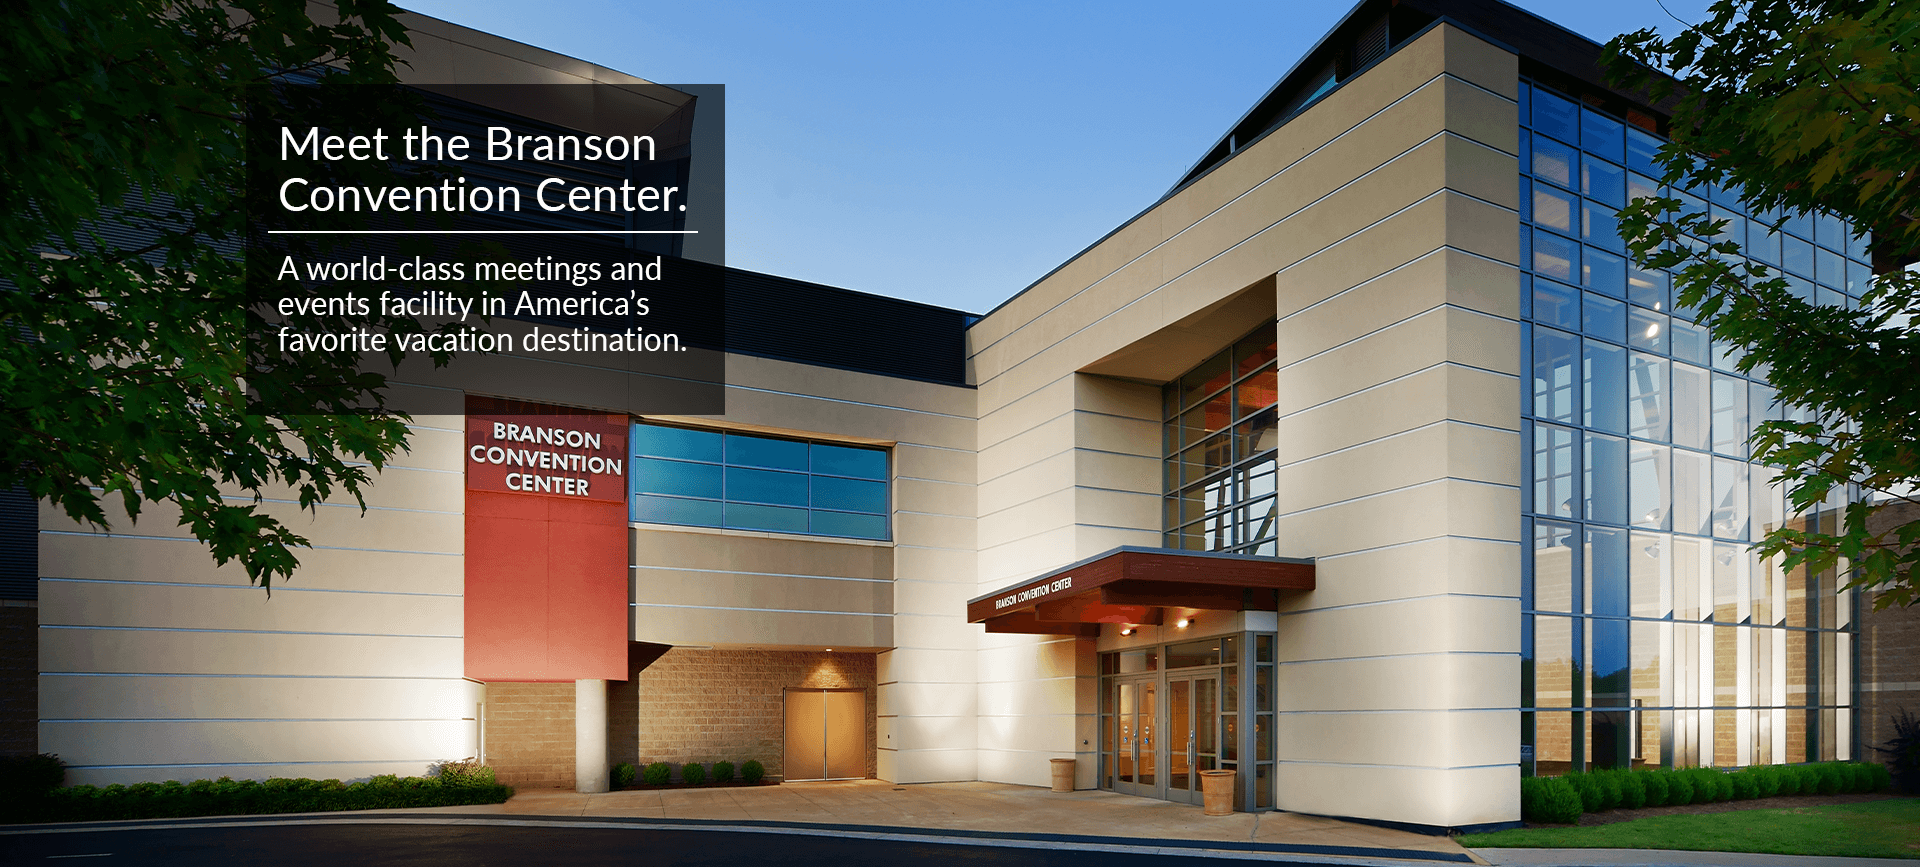 Branson Convention Center is a world-class meetings and events facility in America’s favorite vacation destination.